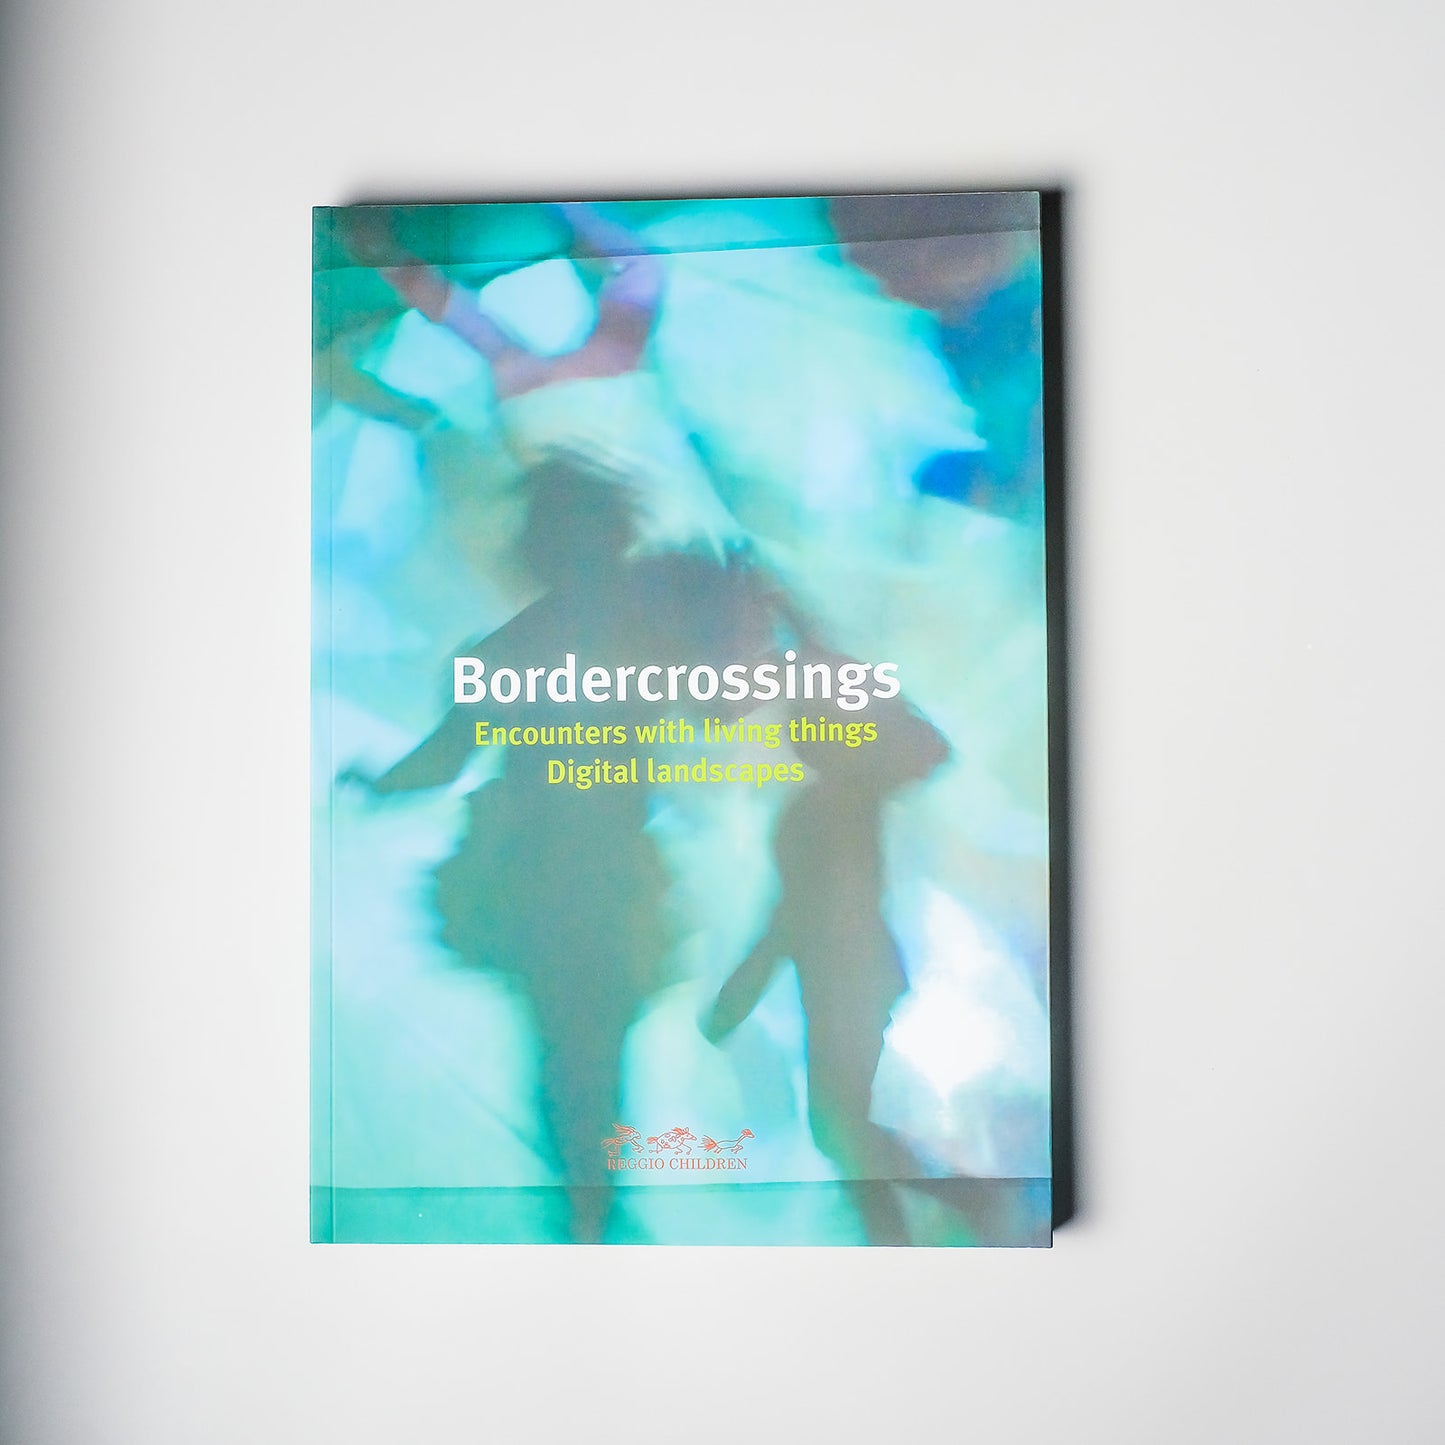 Bordercrossings: Encounters with Living Things / Digital Landscapes